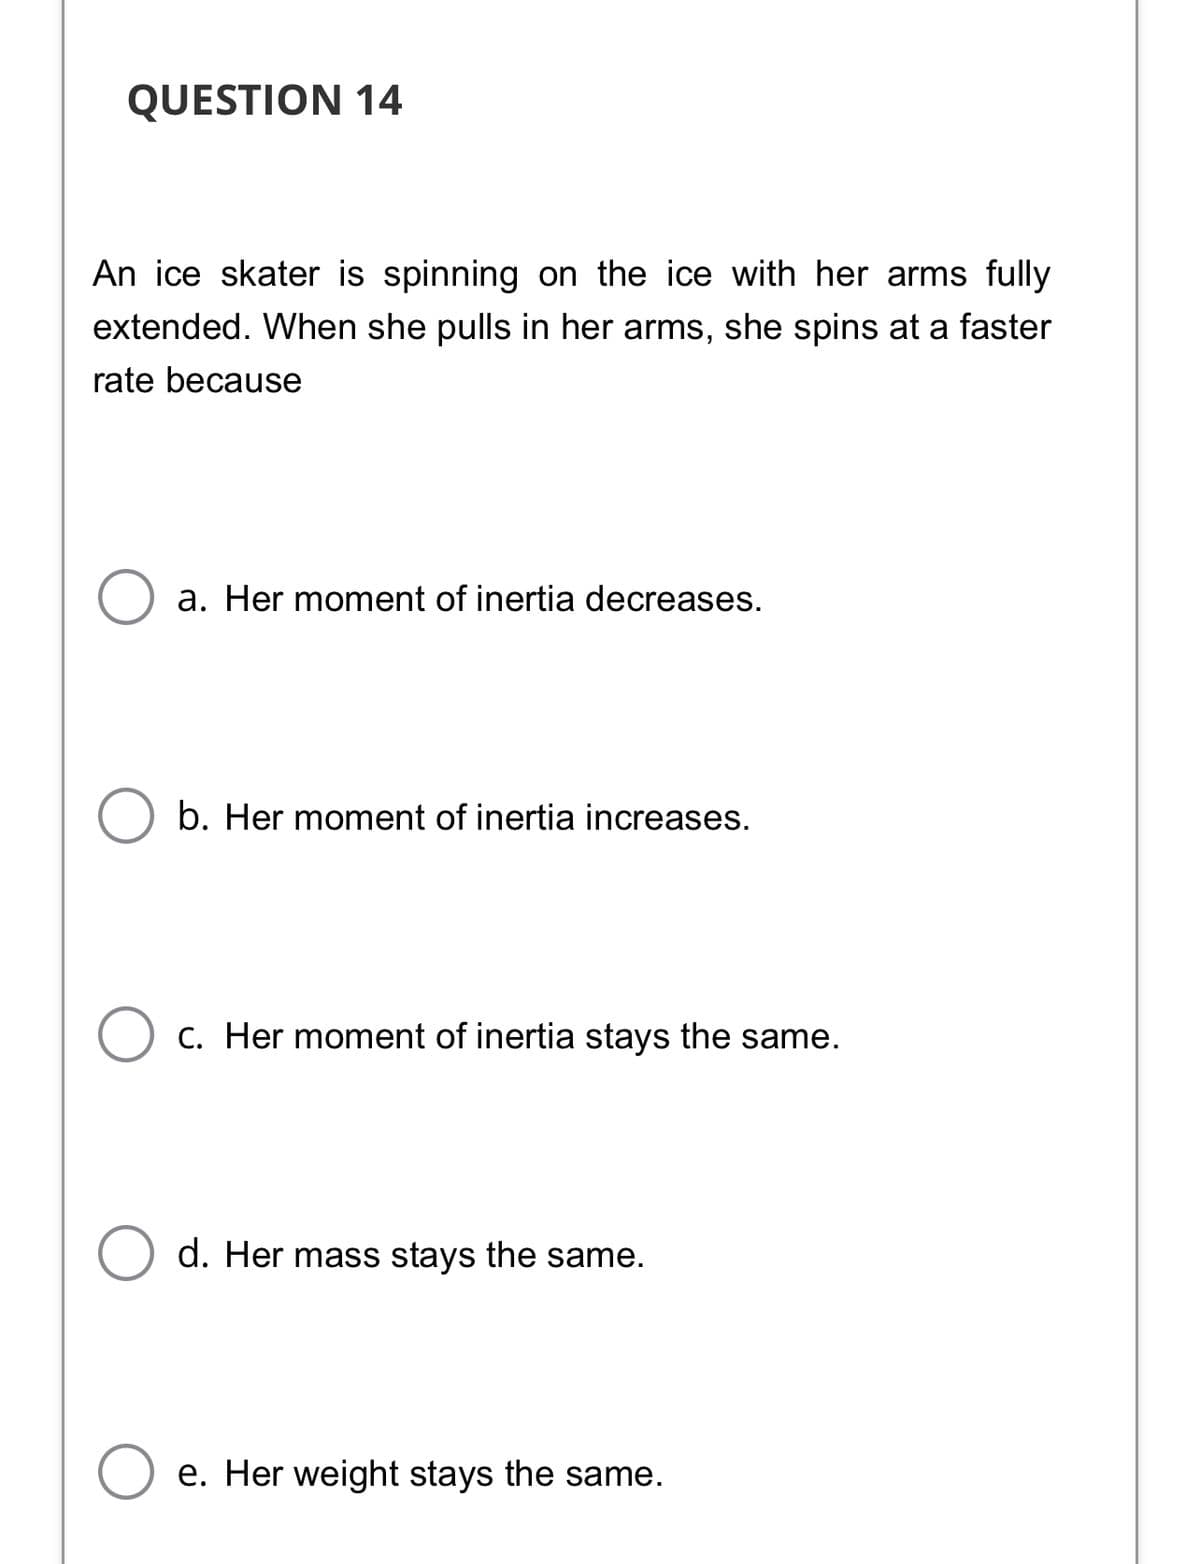 QUESTION 14
An ice skater is spinning on the ice with her arms fully
extended. When she pulls in her arms, she spins at a faster
rate because
a. Her moment of inertia decreases.
b. Her moment of inertia increases.
C. Her moment of inertia stays the same.
d. Her mass stays the same.
e. Her weight stays the same.
